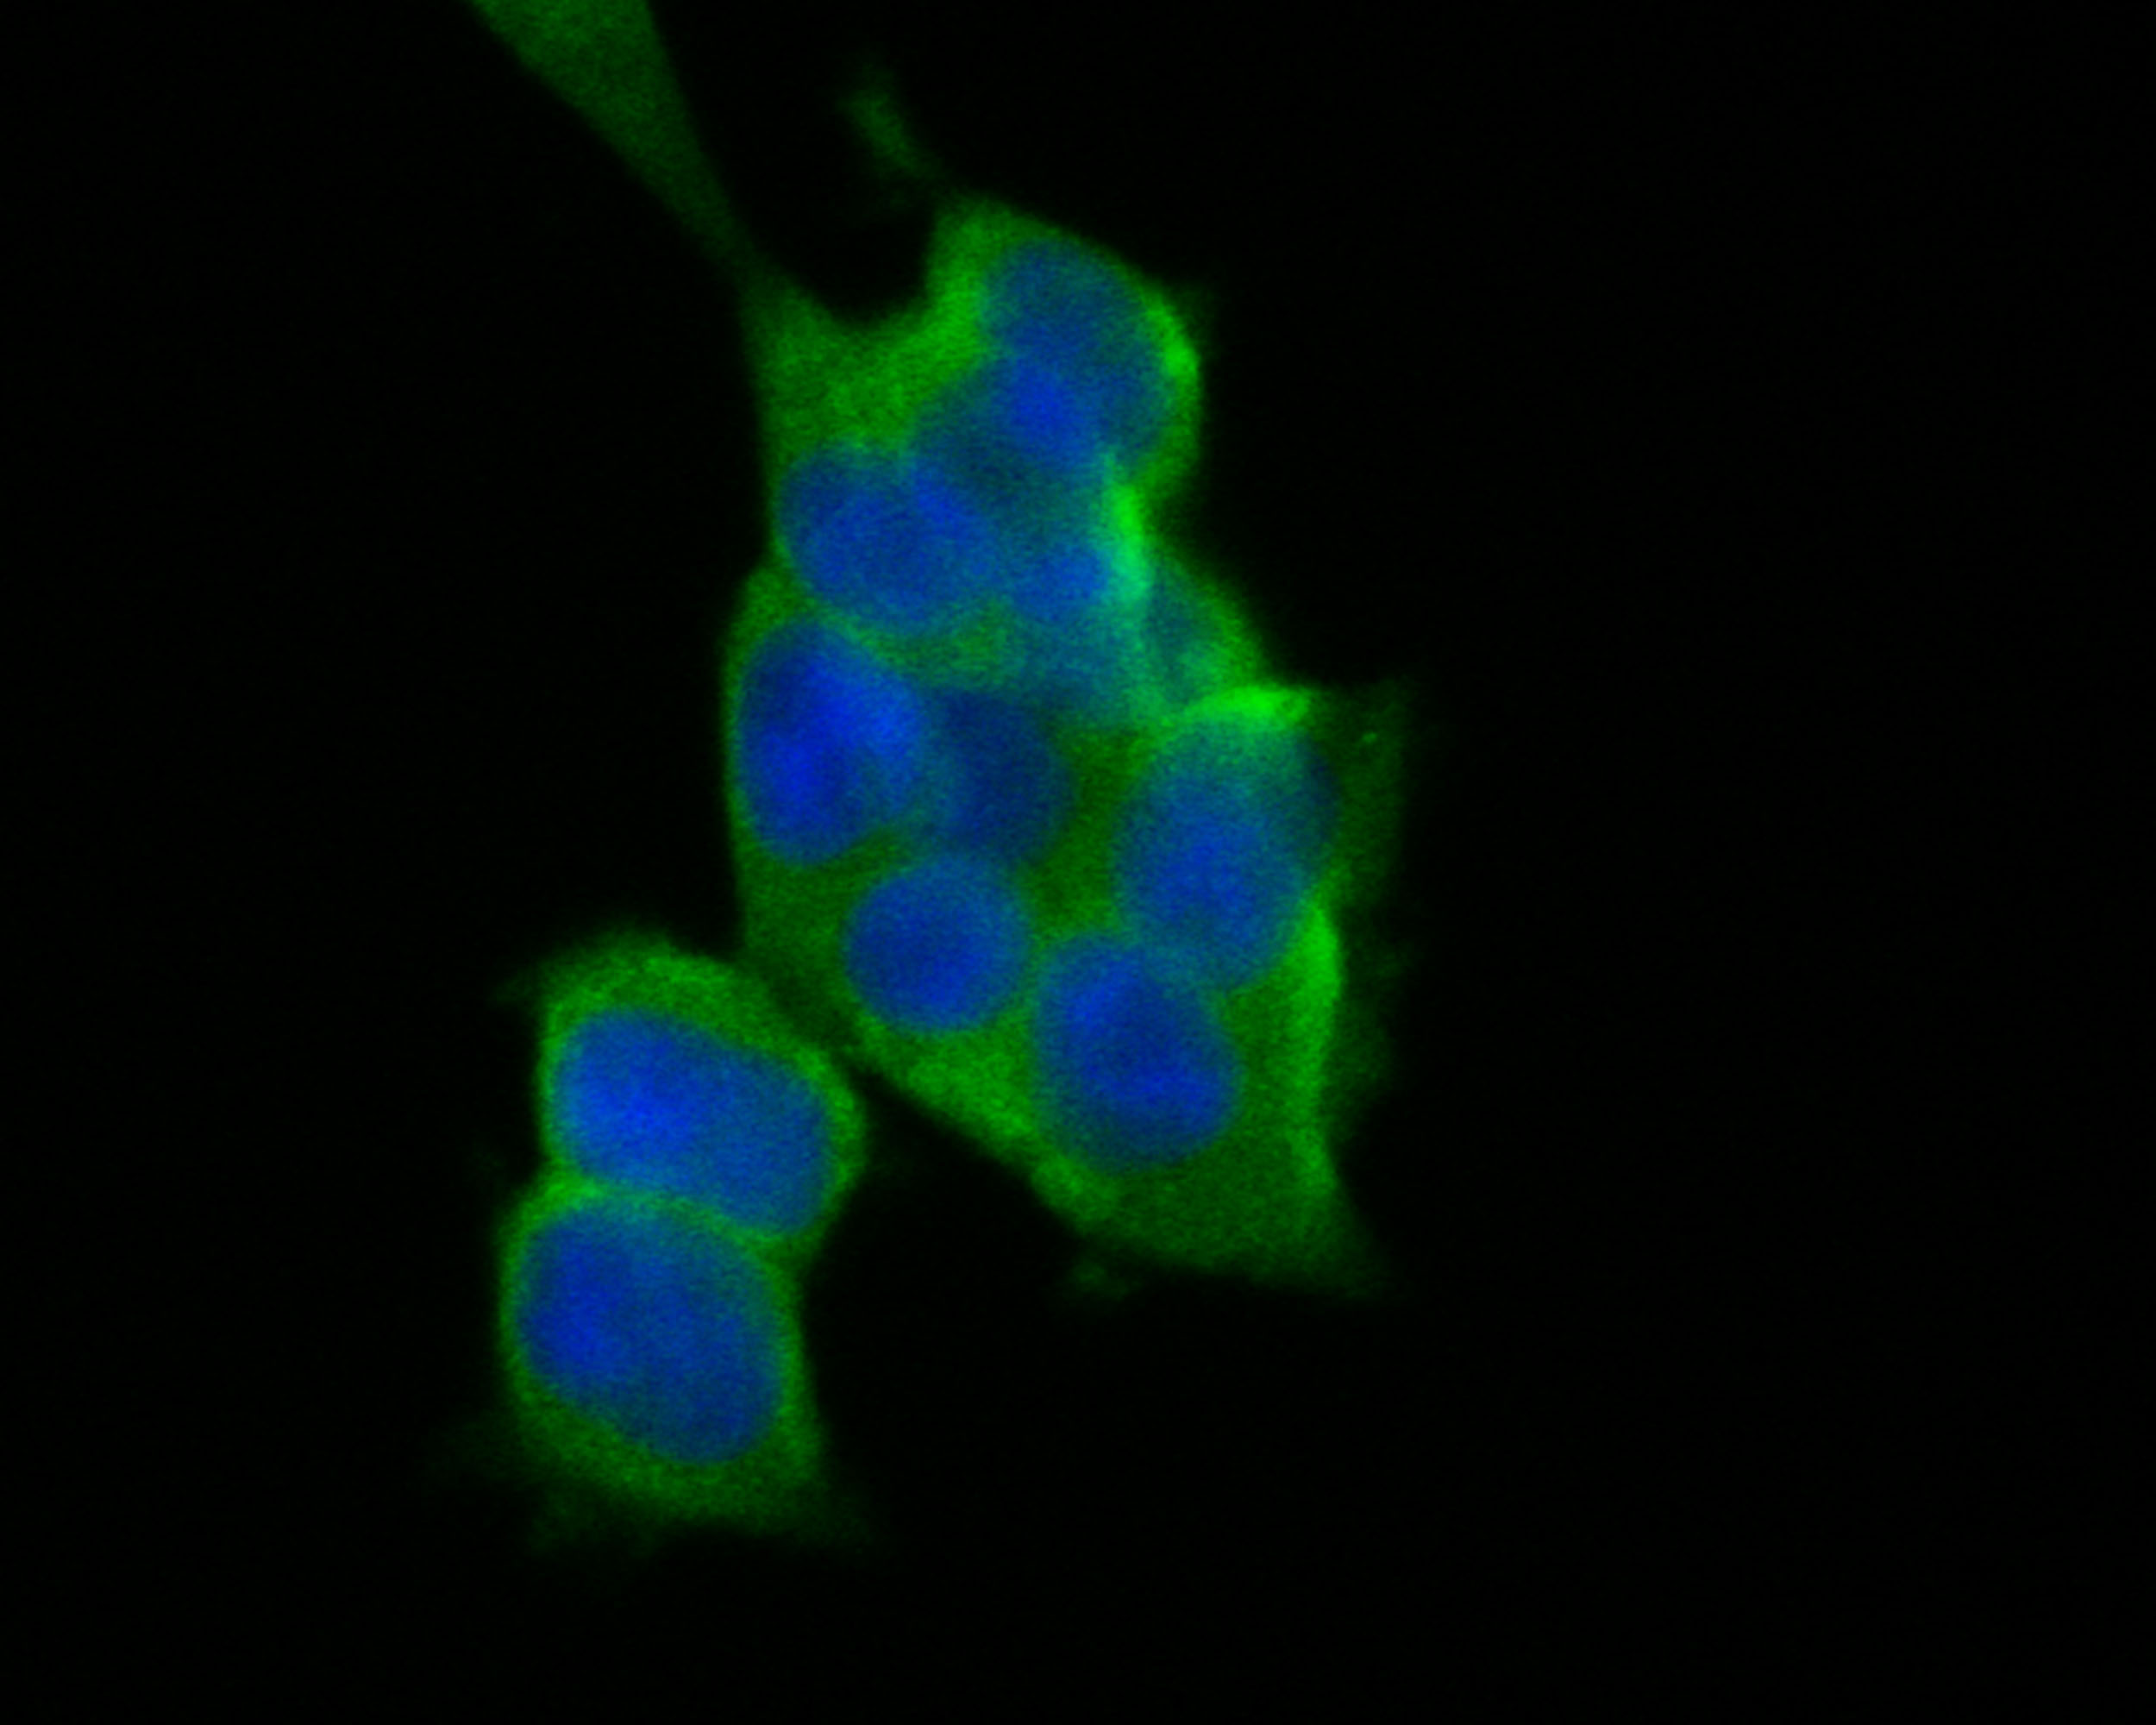 ICC staining of Flt3 in 293T cells (green). Formalin fixed cells were permeabilized with 0.1% Triton X-100 in TBS for 10 minutes at room temperature and blocked with 1% Blocker BSA for 15 minutes at room temperature. Cells were probed with the primary antibody (ER2001-25, 1/50) for 1 hour at room temperature, washed with PBS. Alexa Fluor®488 Goat anti-Rabbit IgG was used as the secondary antibody at 1/1,000 dilution. The nuclear counter stain is DAPI (blue).